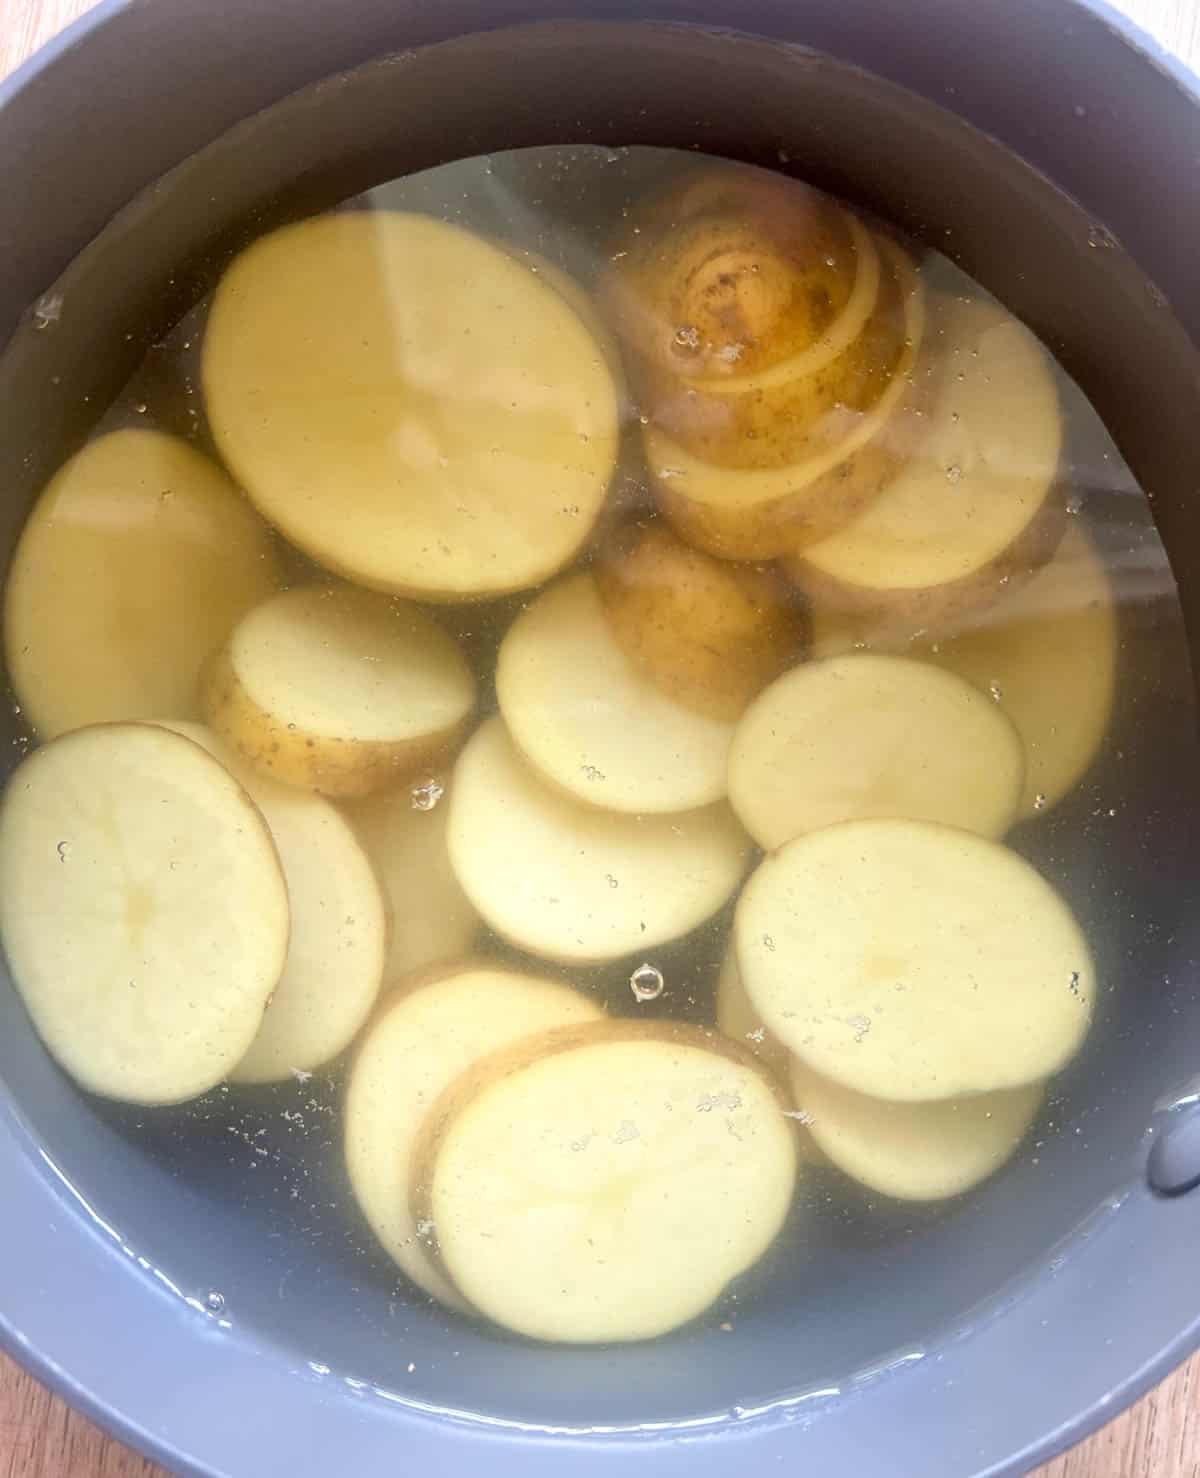 Potatoes in a pan with water before boiling.